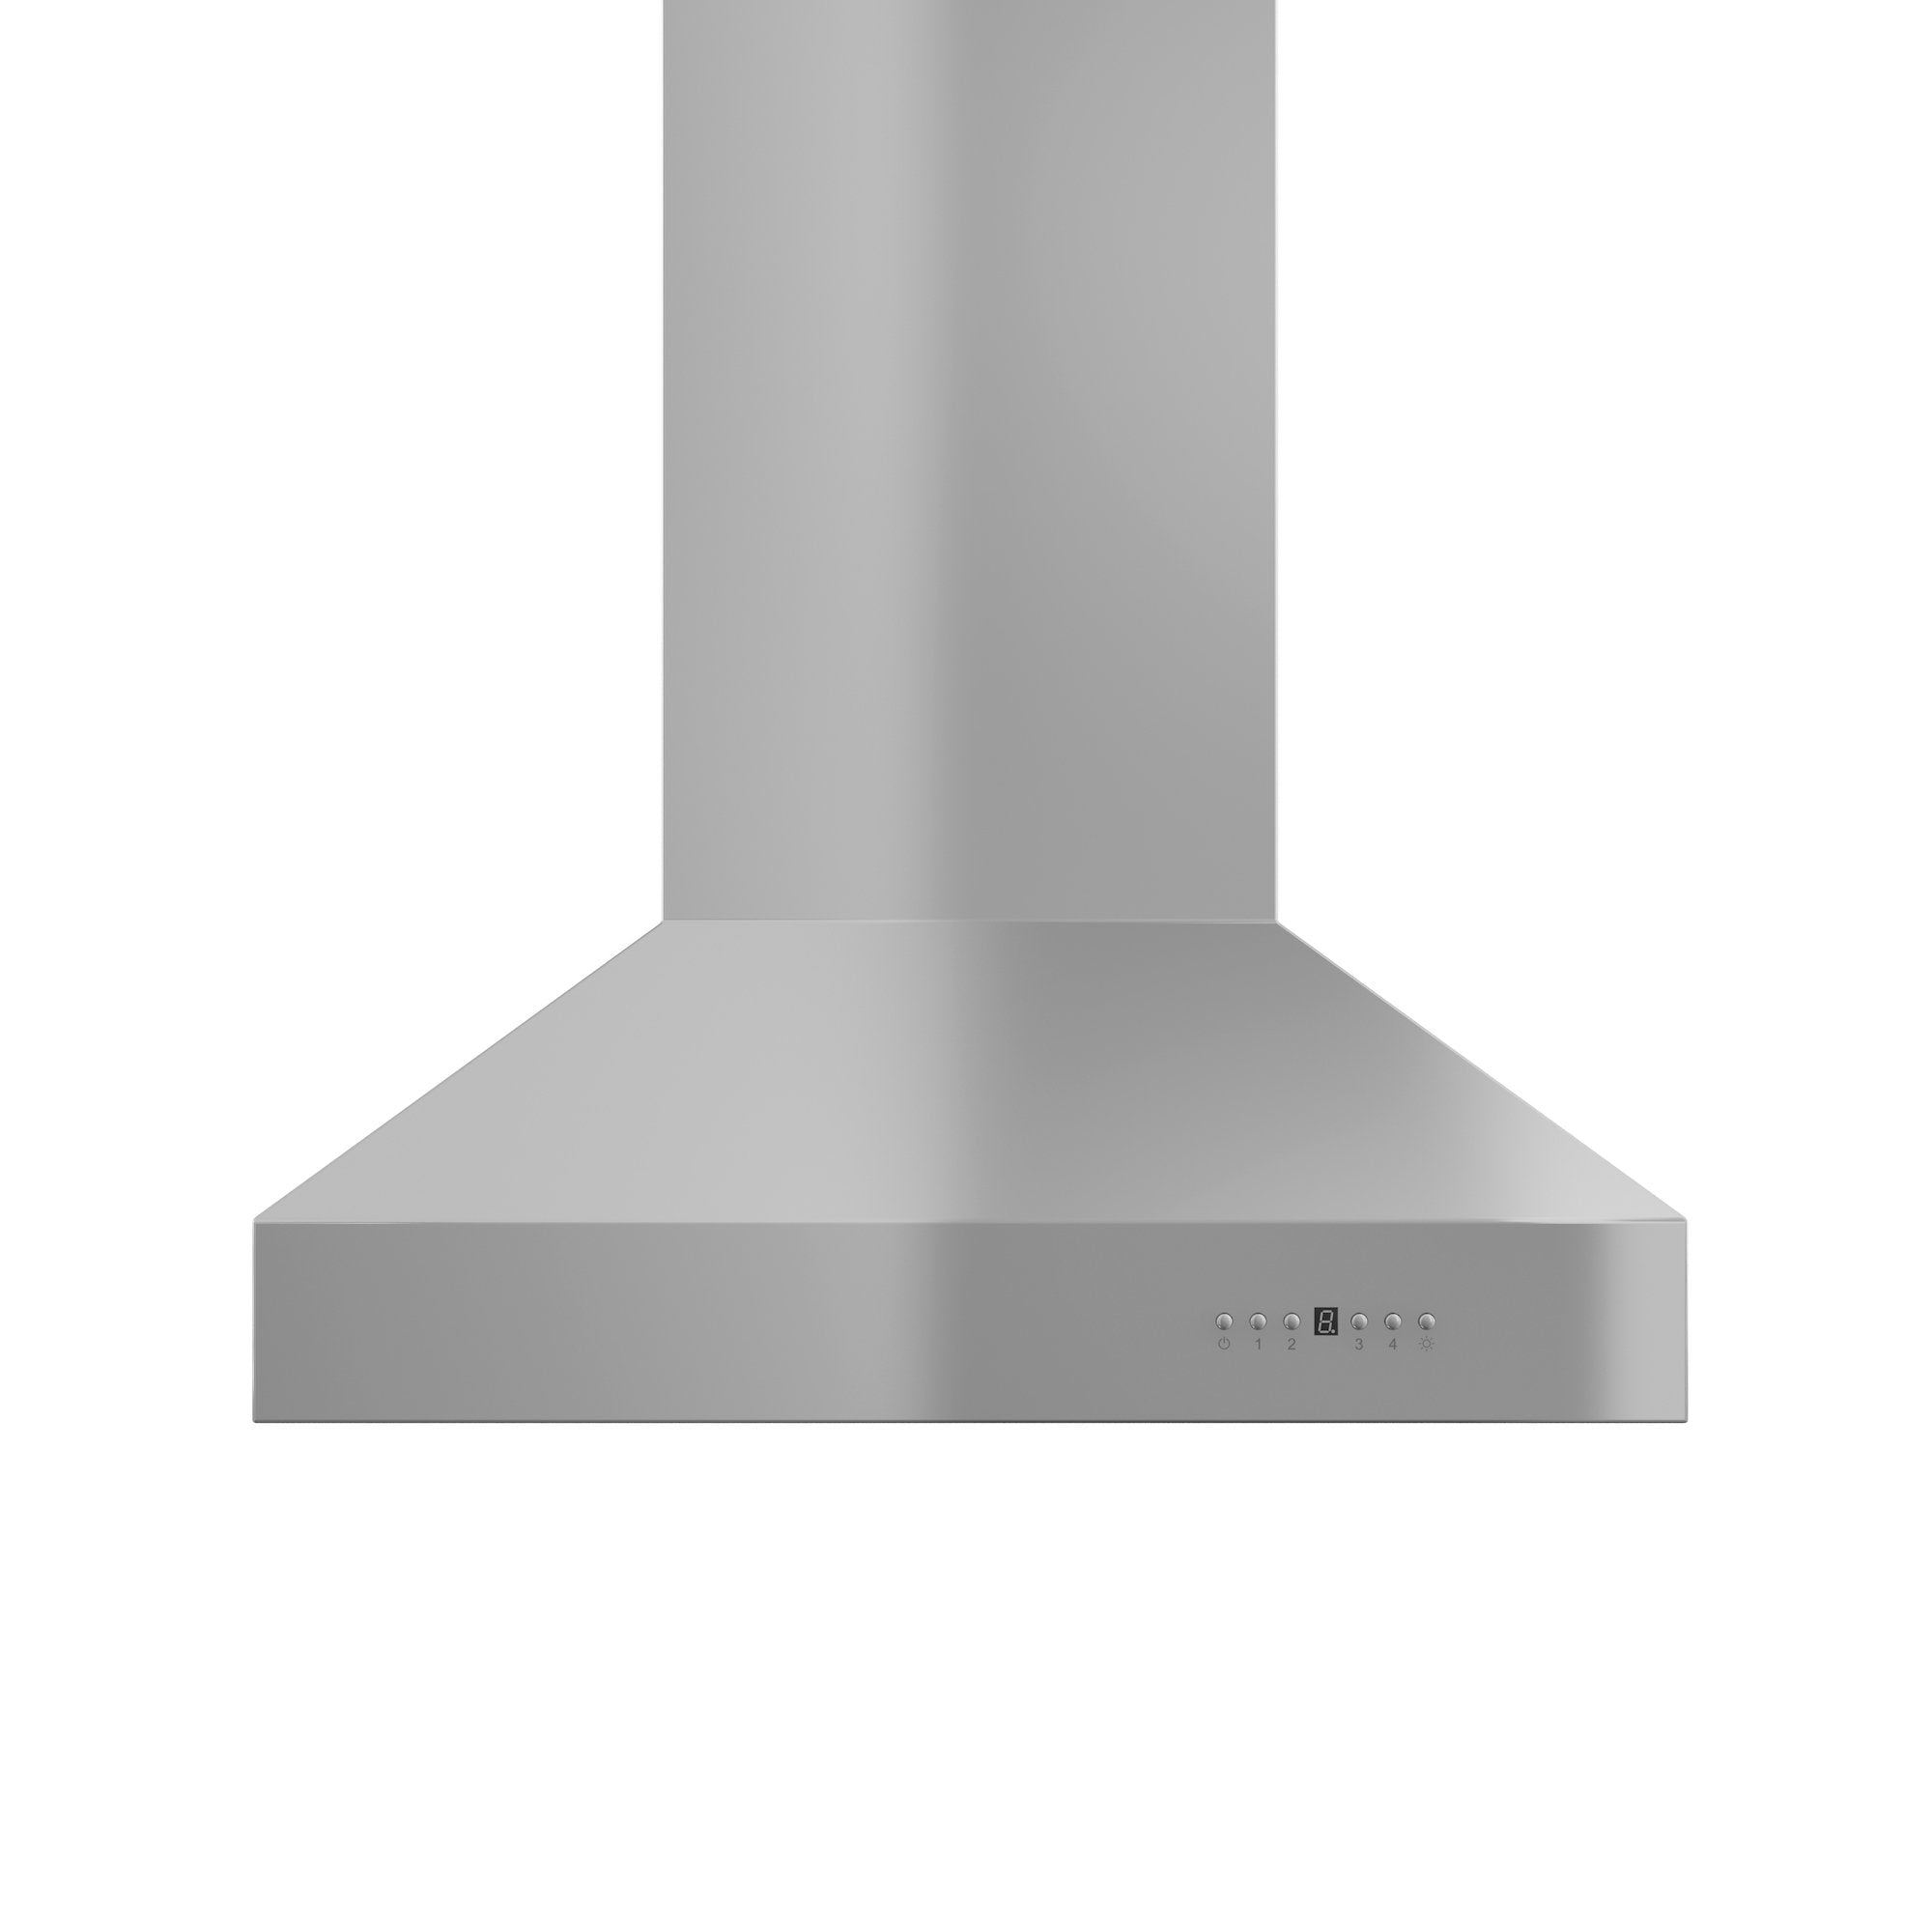 ZLINE Outdoor Approved Island Mount Range Hood in Stainless Steel (697i-304) front.